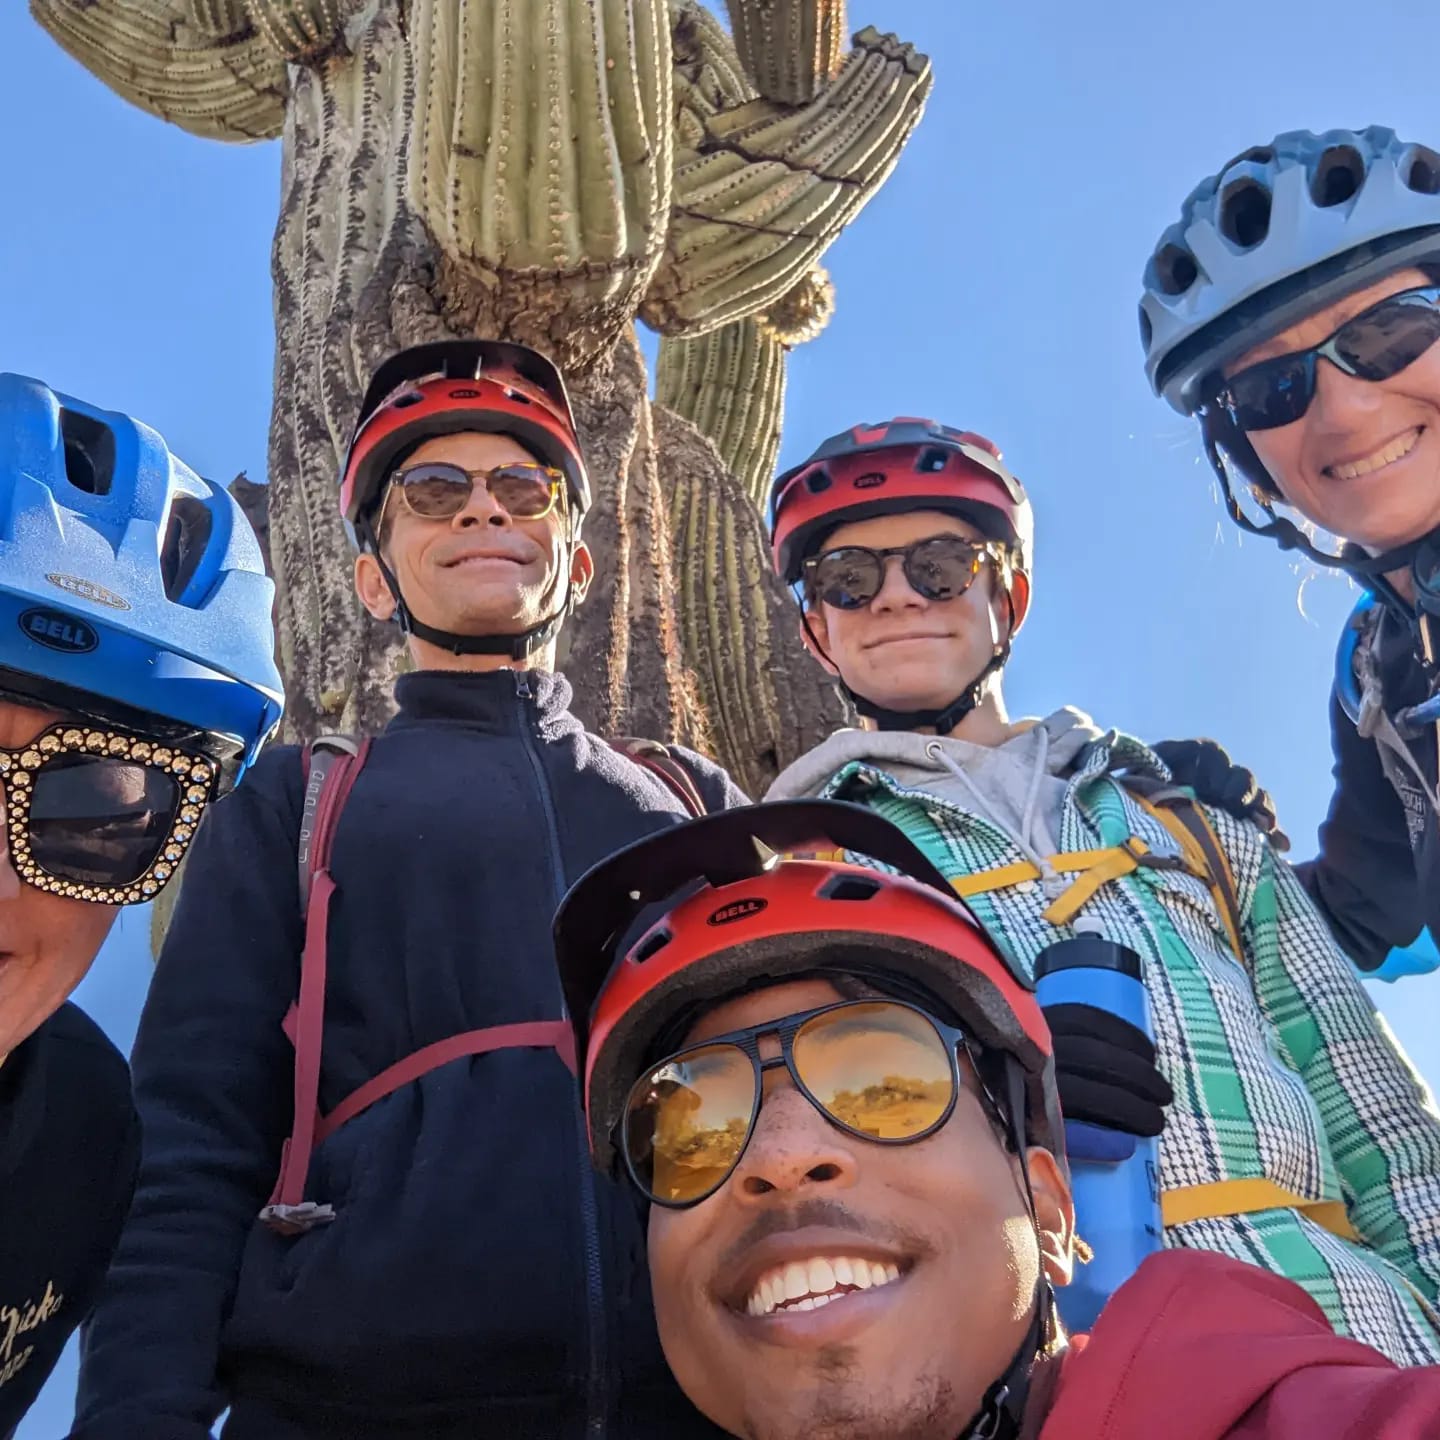 Out concierge friends from the Four Seasons Scottsdale -- Ted and Marcel (second and third from the left) -- were part of a Phoenix mountain bike tours group earlier this month with the Wild Bunch Desert Guides.